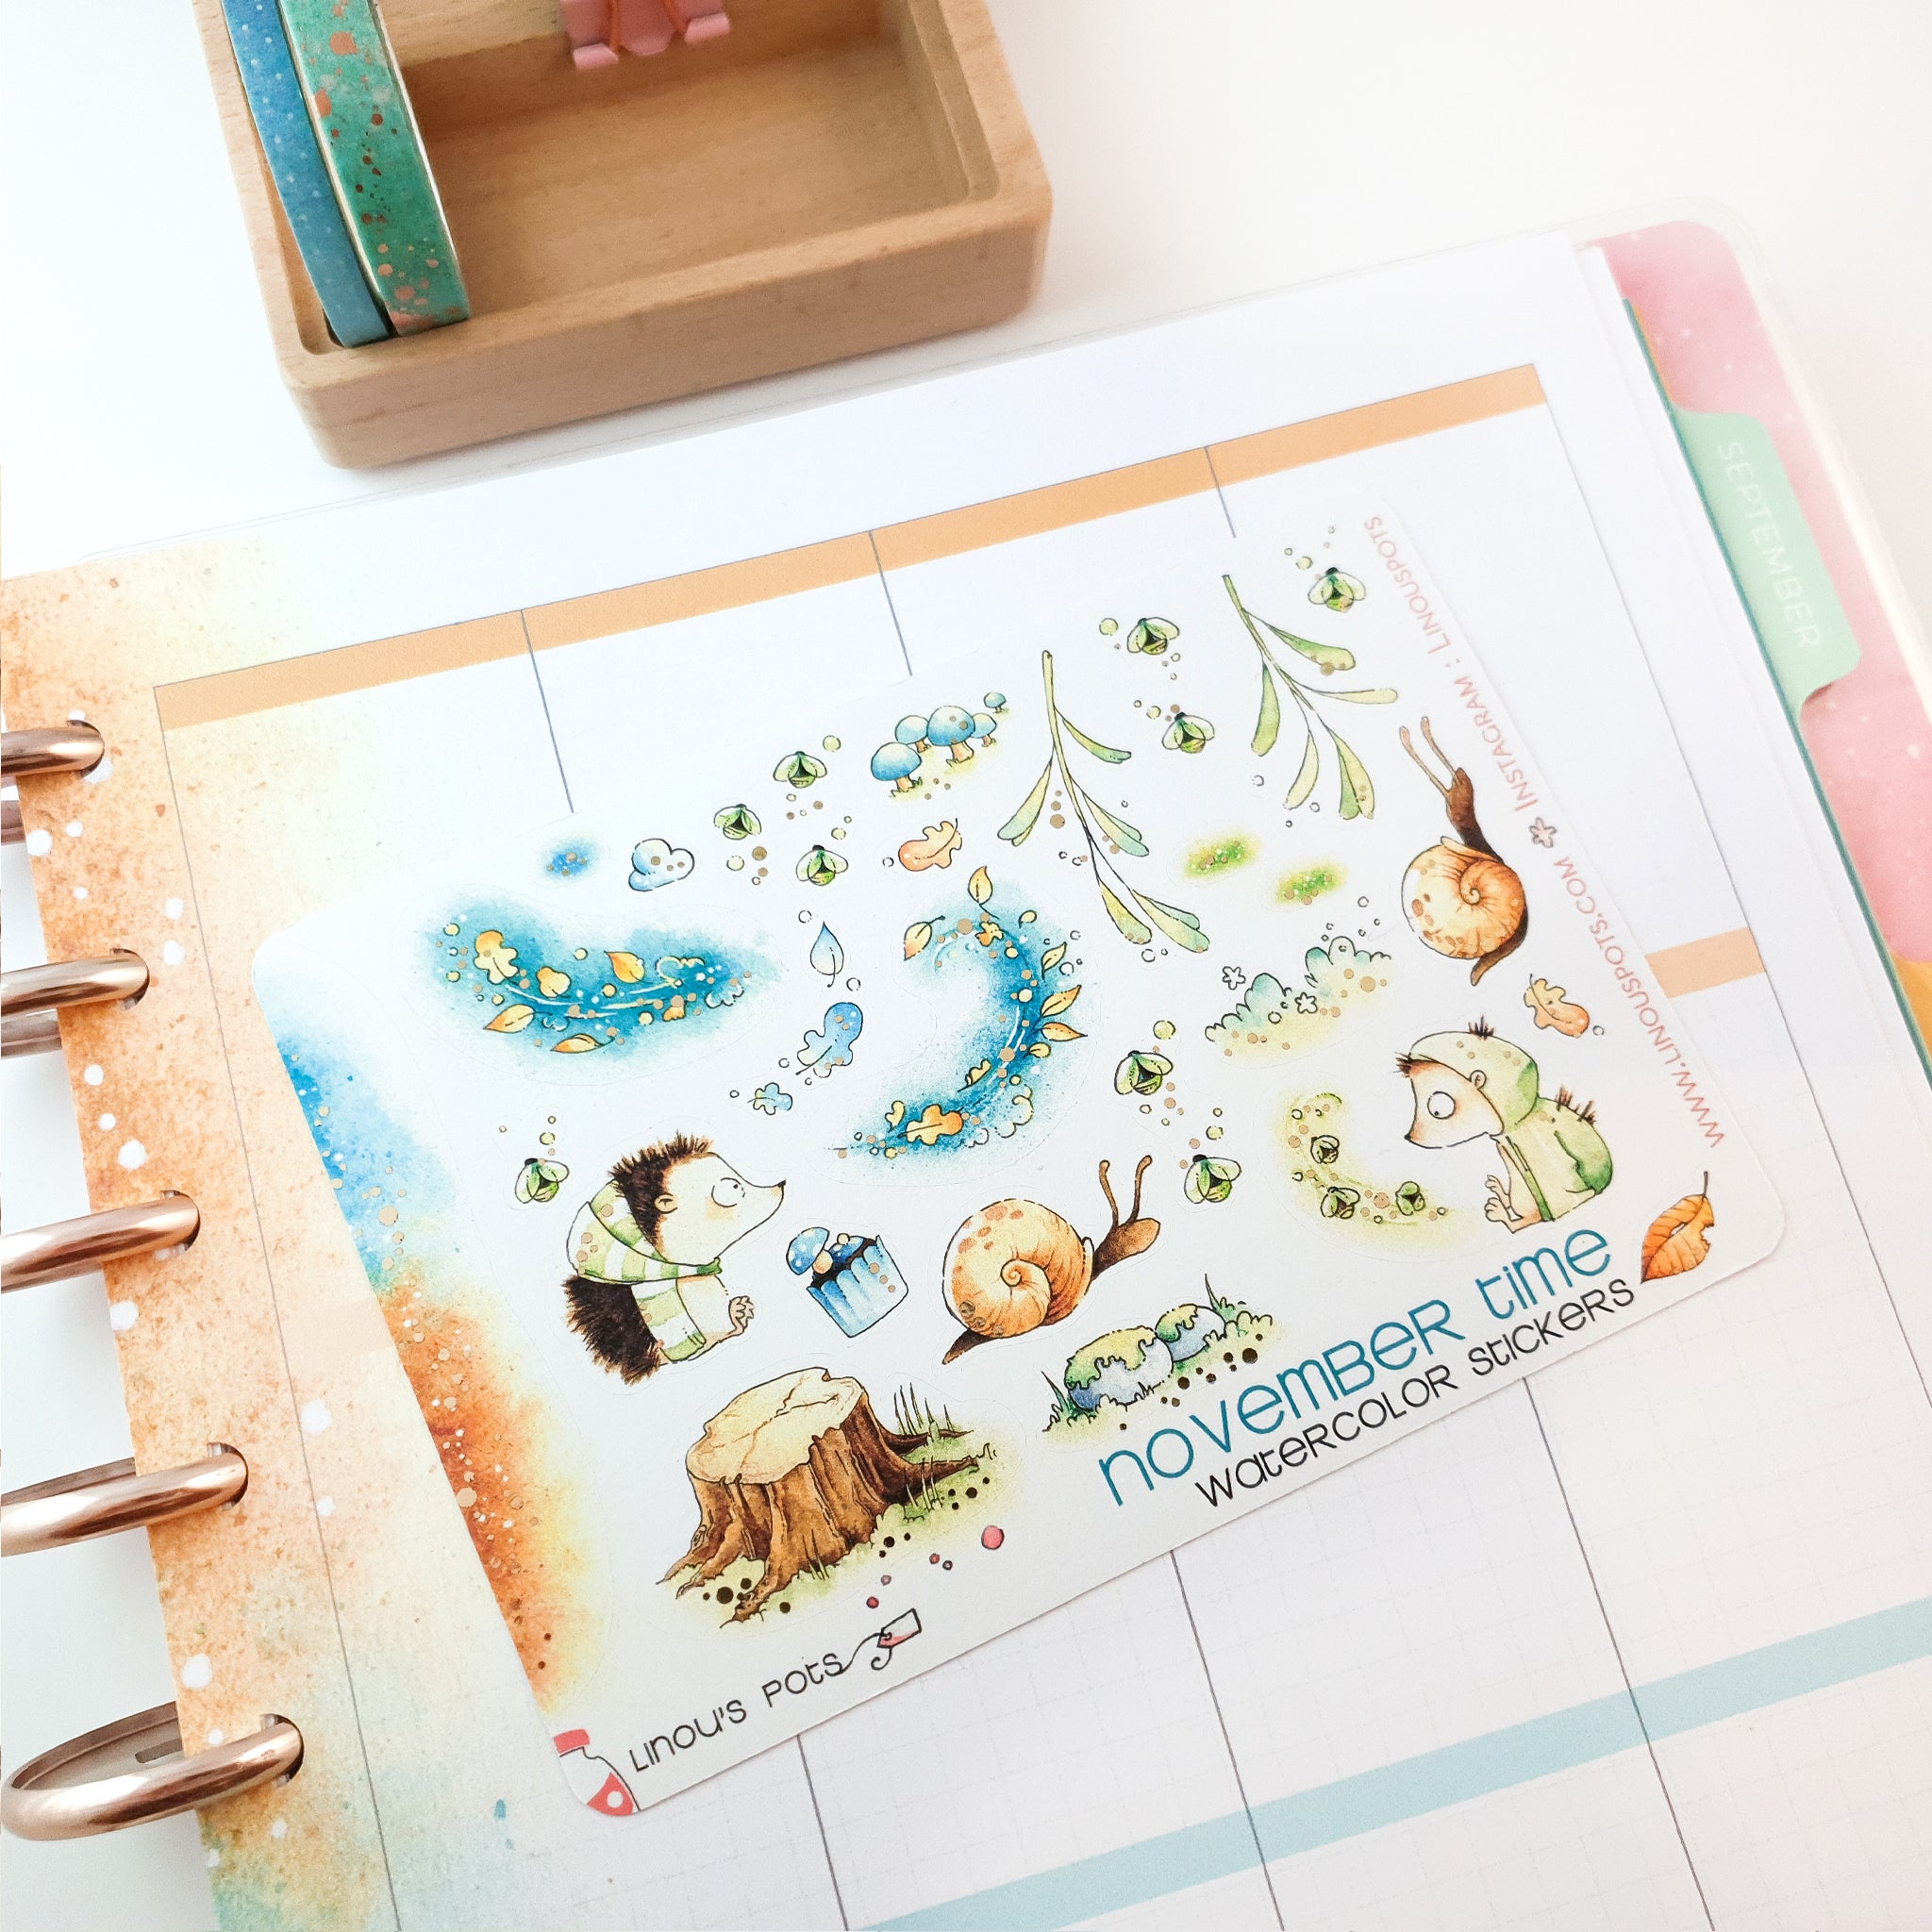 Watercolor stickers with foiled details with fall mood